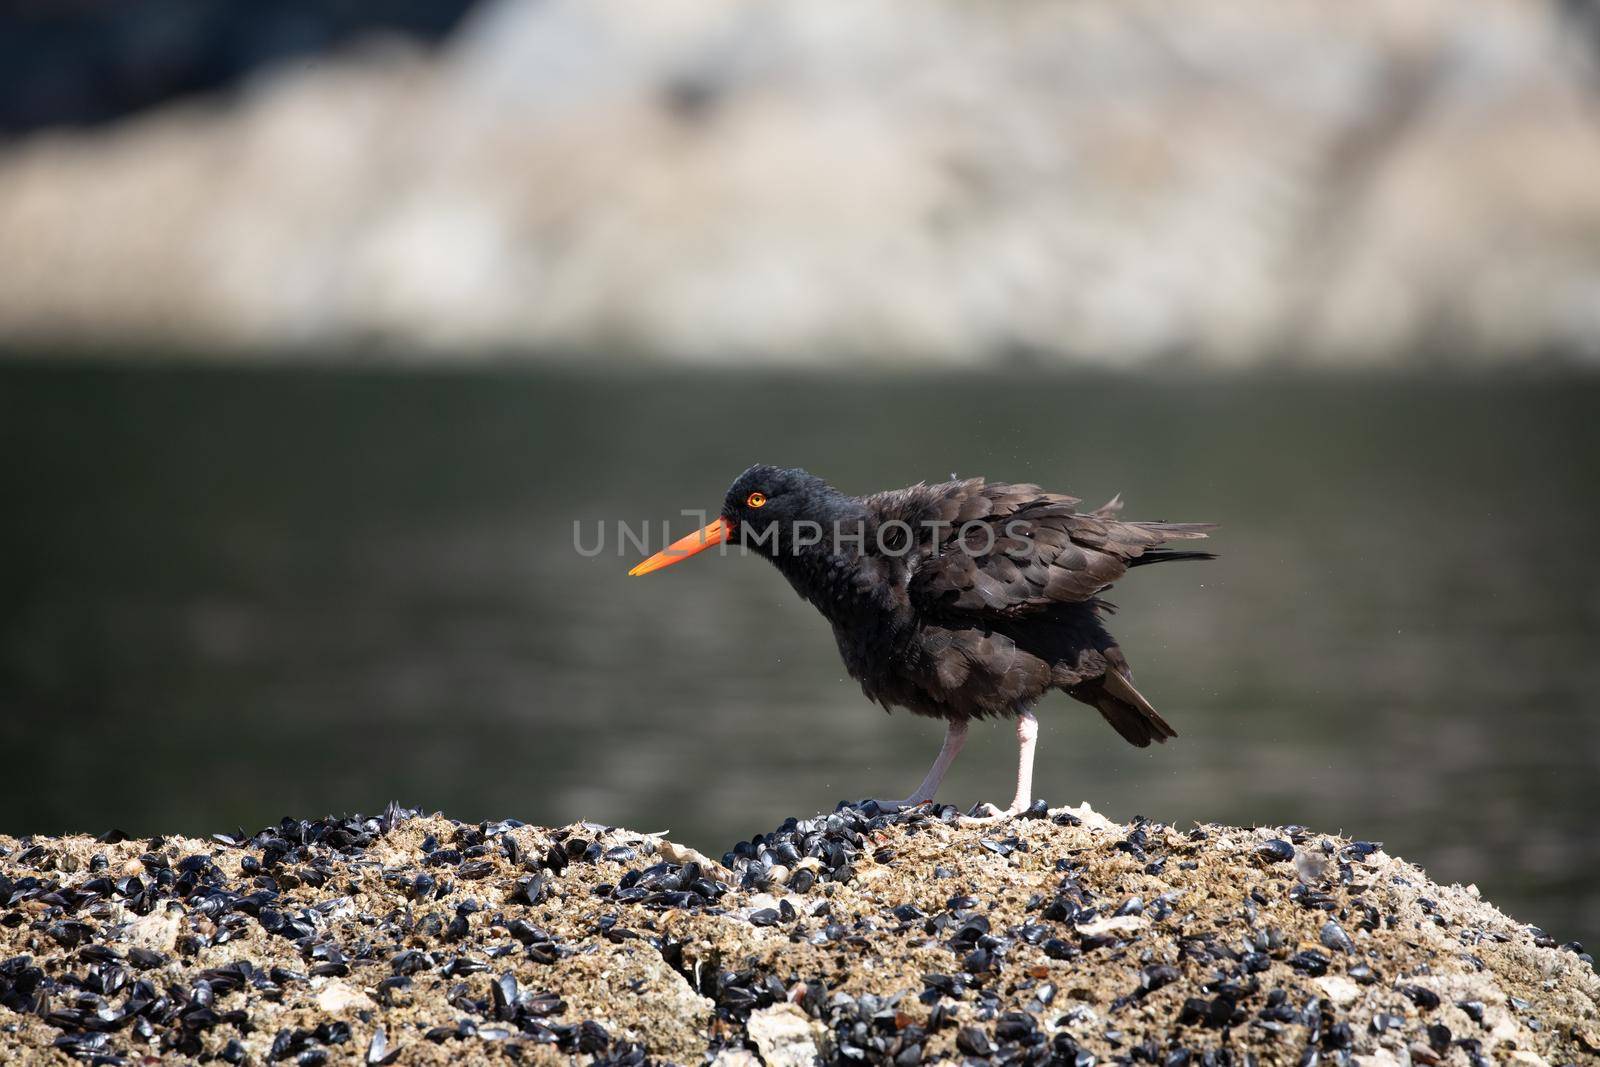 Black Oystercatcher ruffling its feathers while standing on a shell covered rock with water in the background, near Ballet Bay, Sunshine Coast, British Columbia